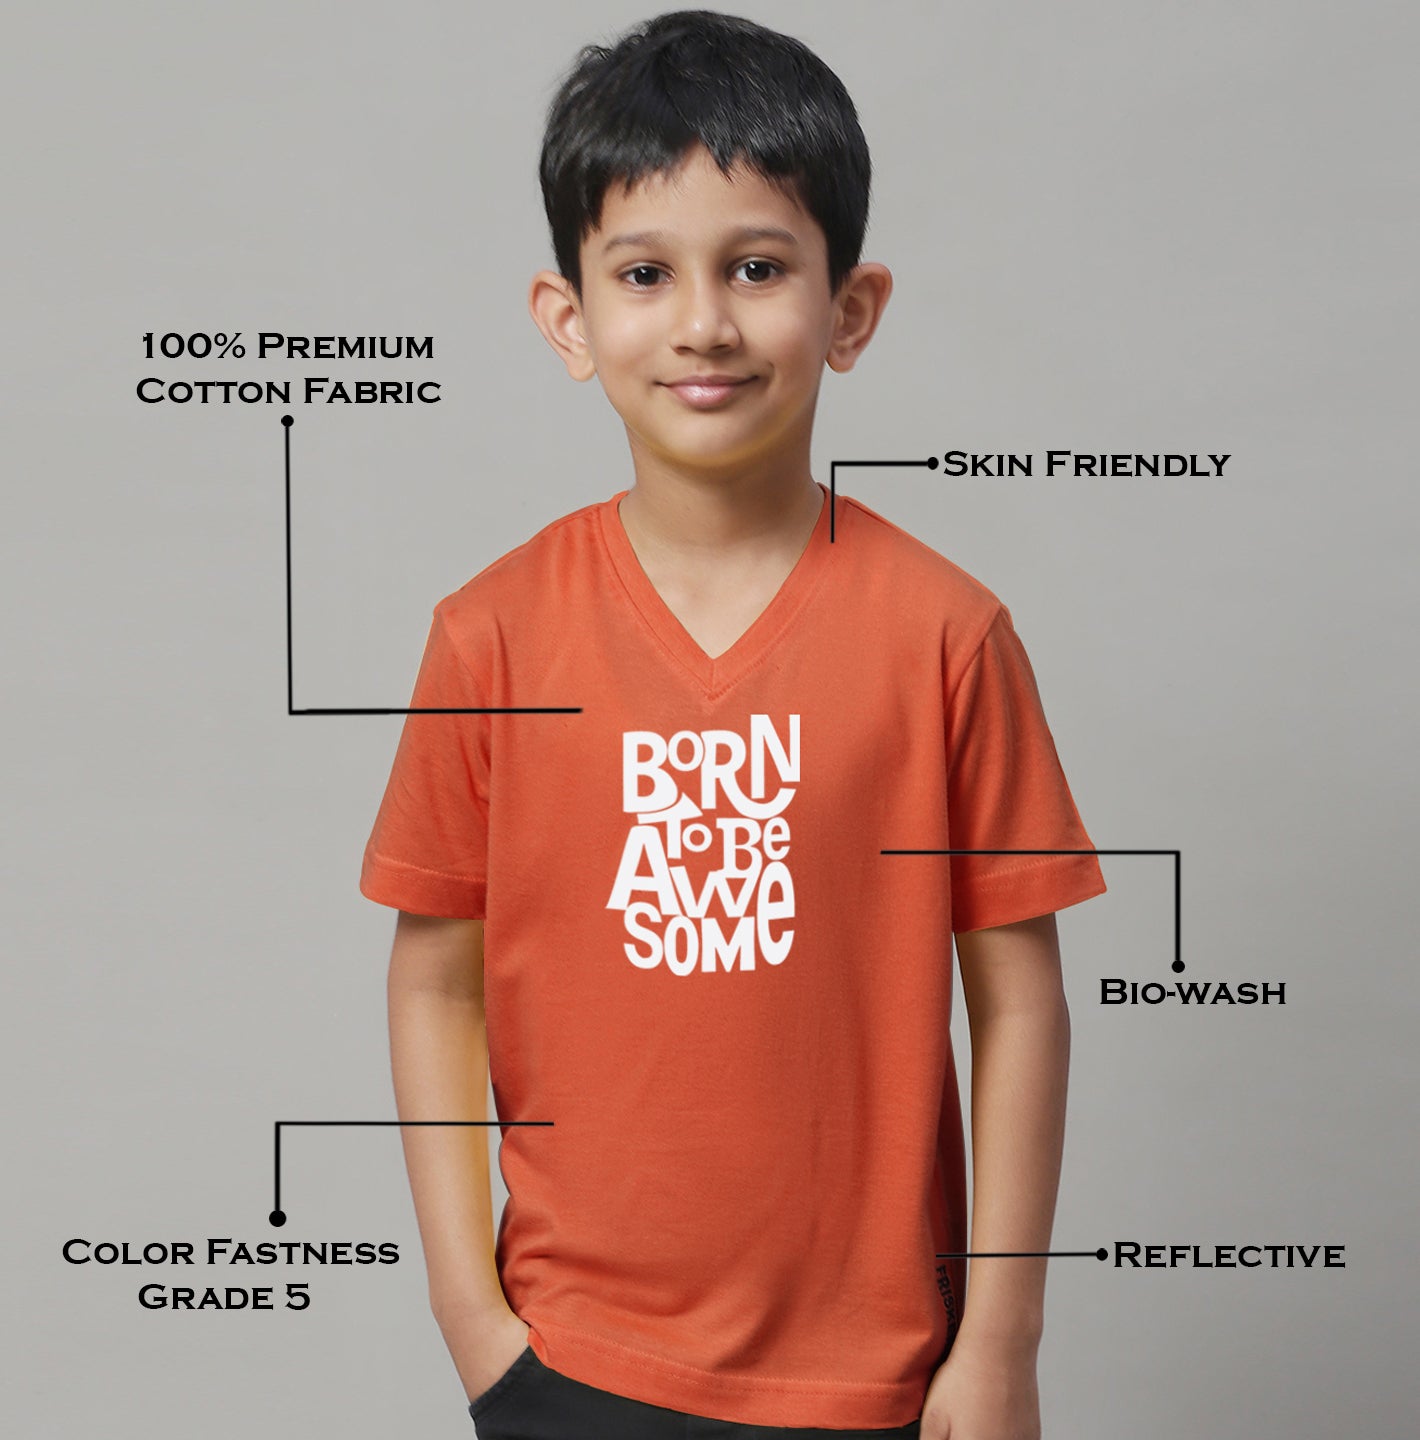 Boys Born To Be Awesome Half Sleeves Printed T-Shirt - Friskers